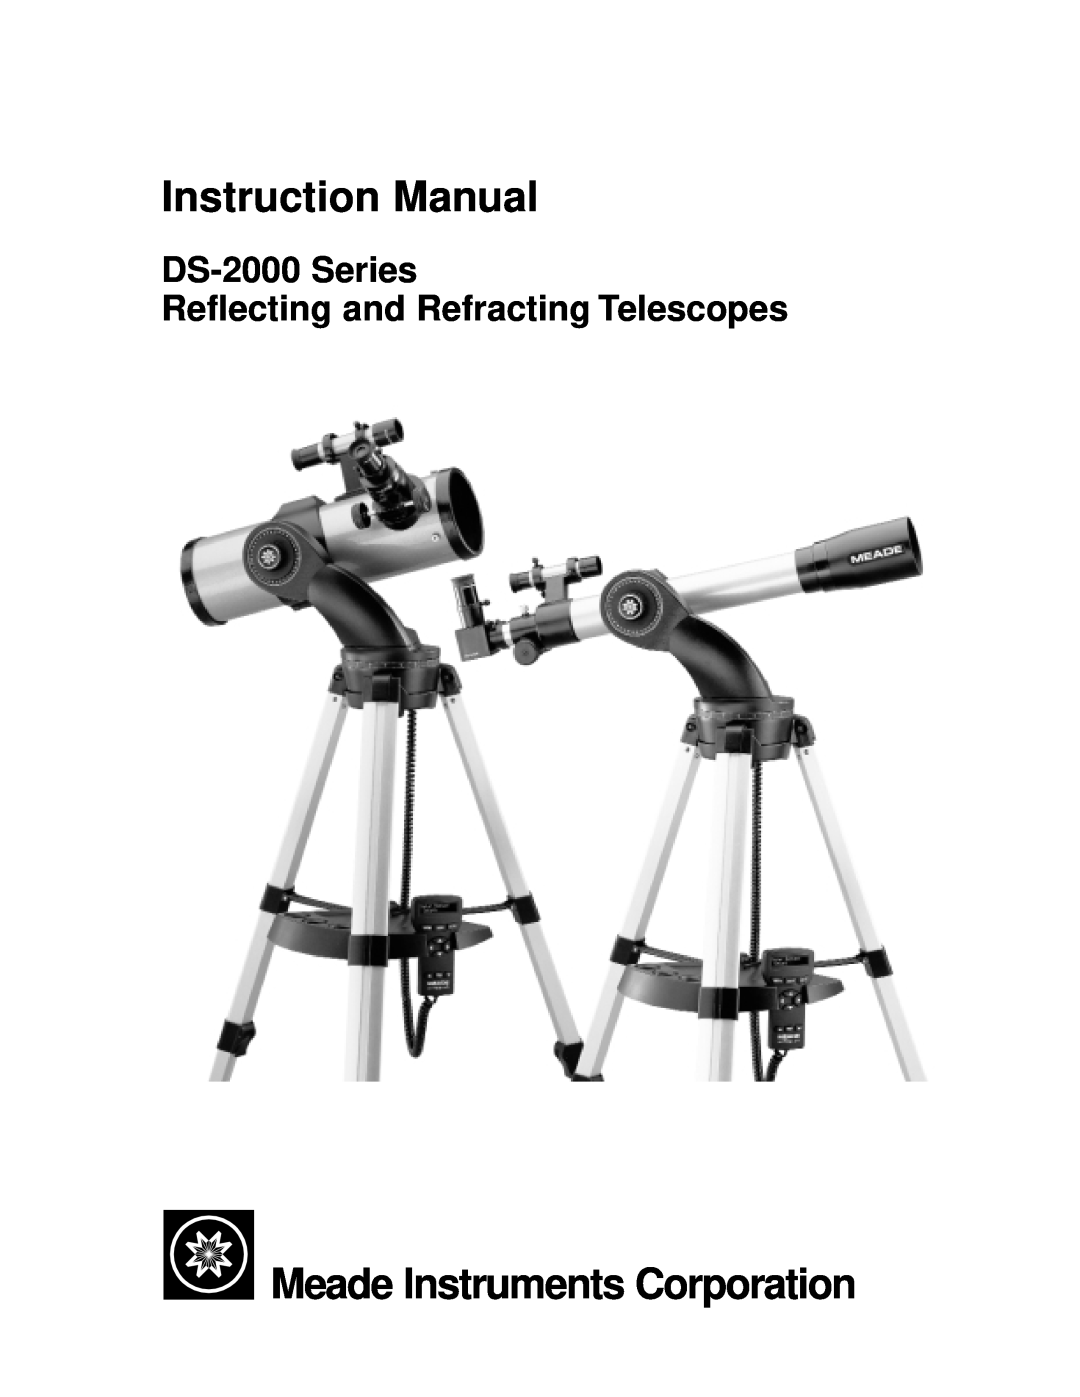 Meade instruction manual Meade Instruments Corporation, DS-2000 Series Reflecting and Refracting Telescopes 